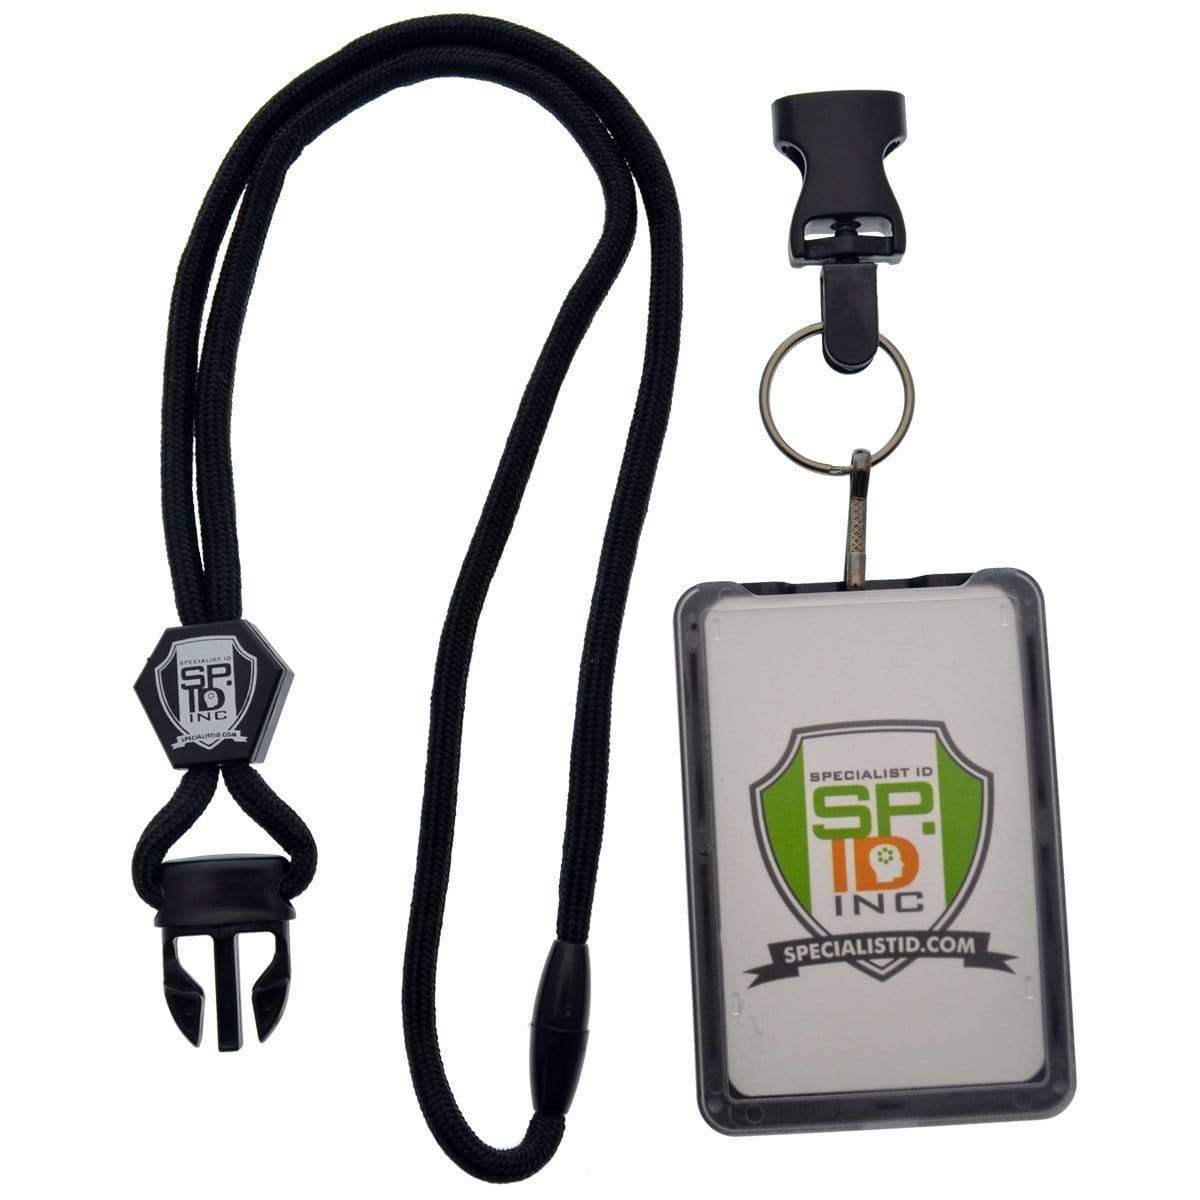 A Top Loading THREE ID Card Badge Holder with Heavy Duty Lanyard w/ Detachable Metal Clip and Key Ring by Specialist ID, displaying the logo and website of Special ID Inc.